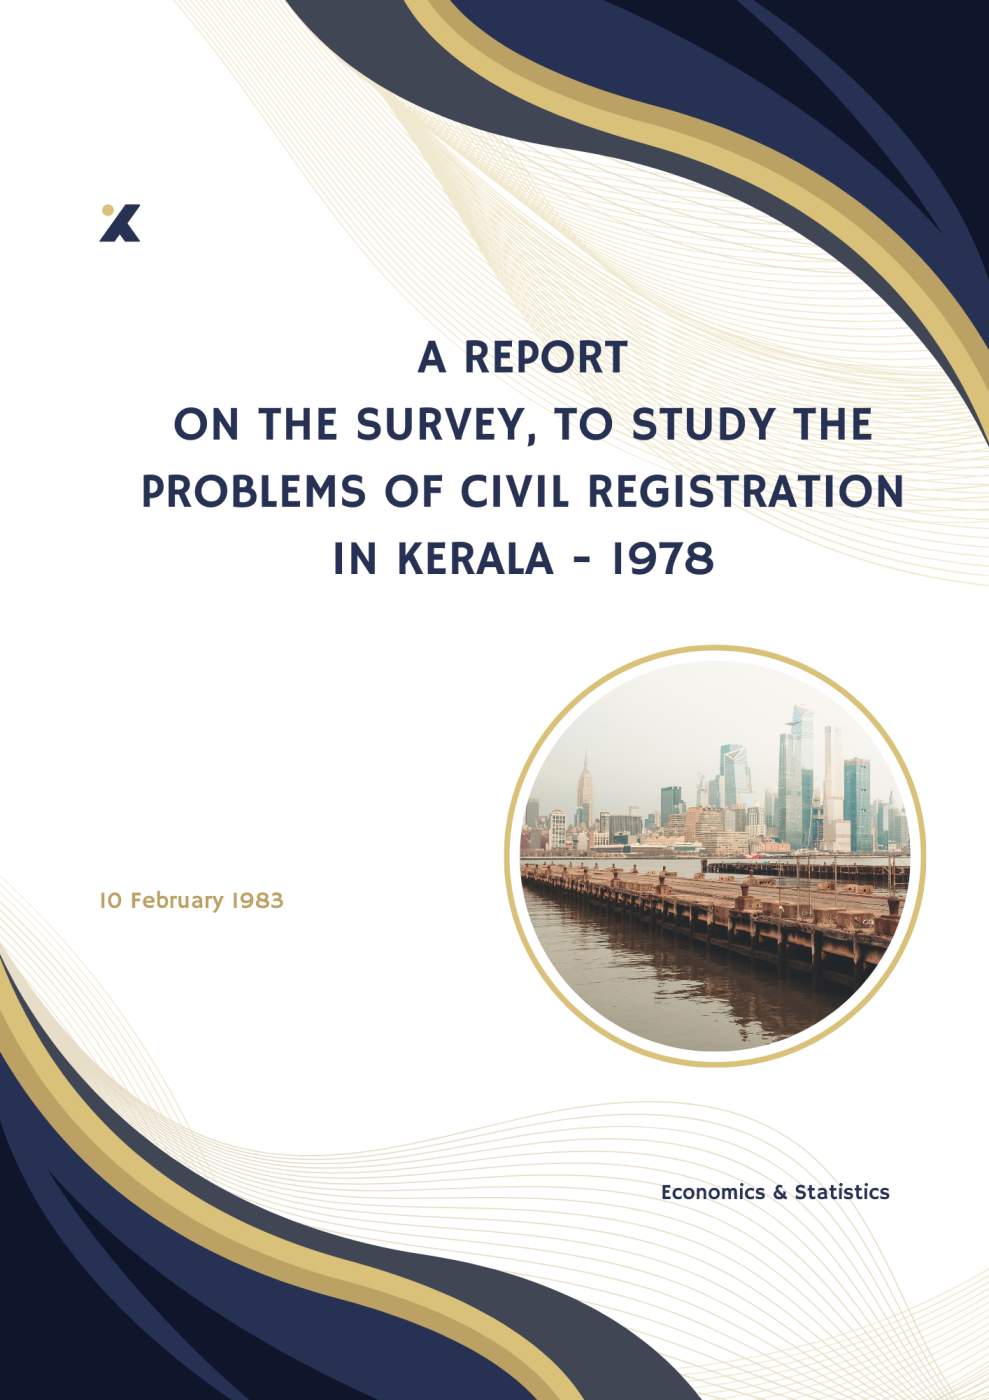 A Report on the Survey, To Study the problems of civil Registration in Kerala - 1978